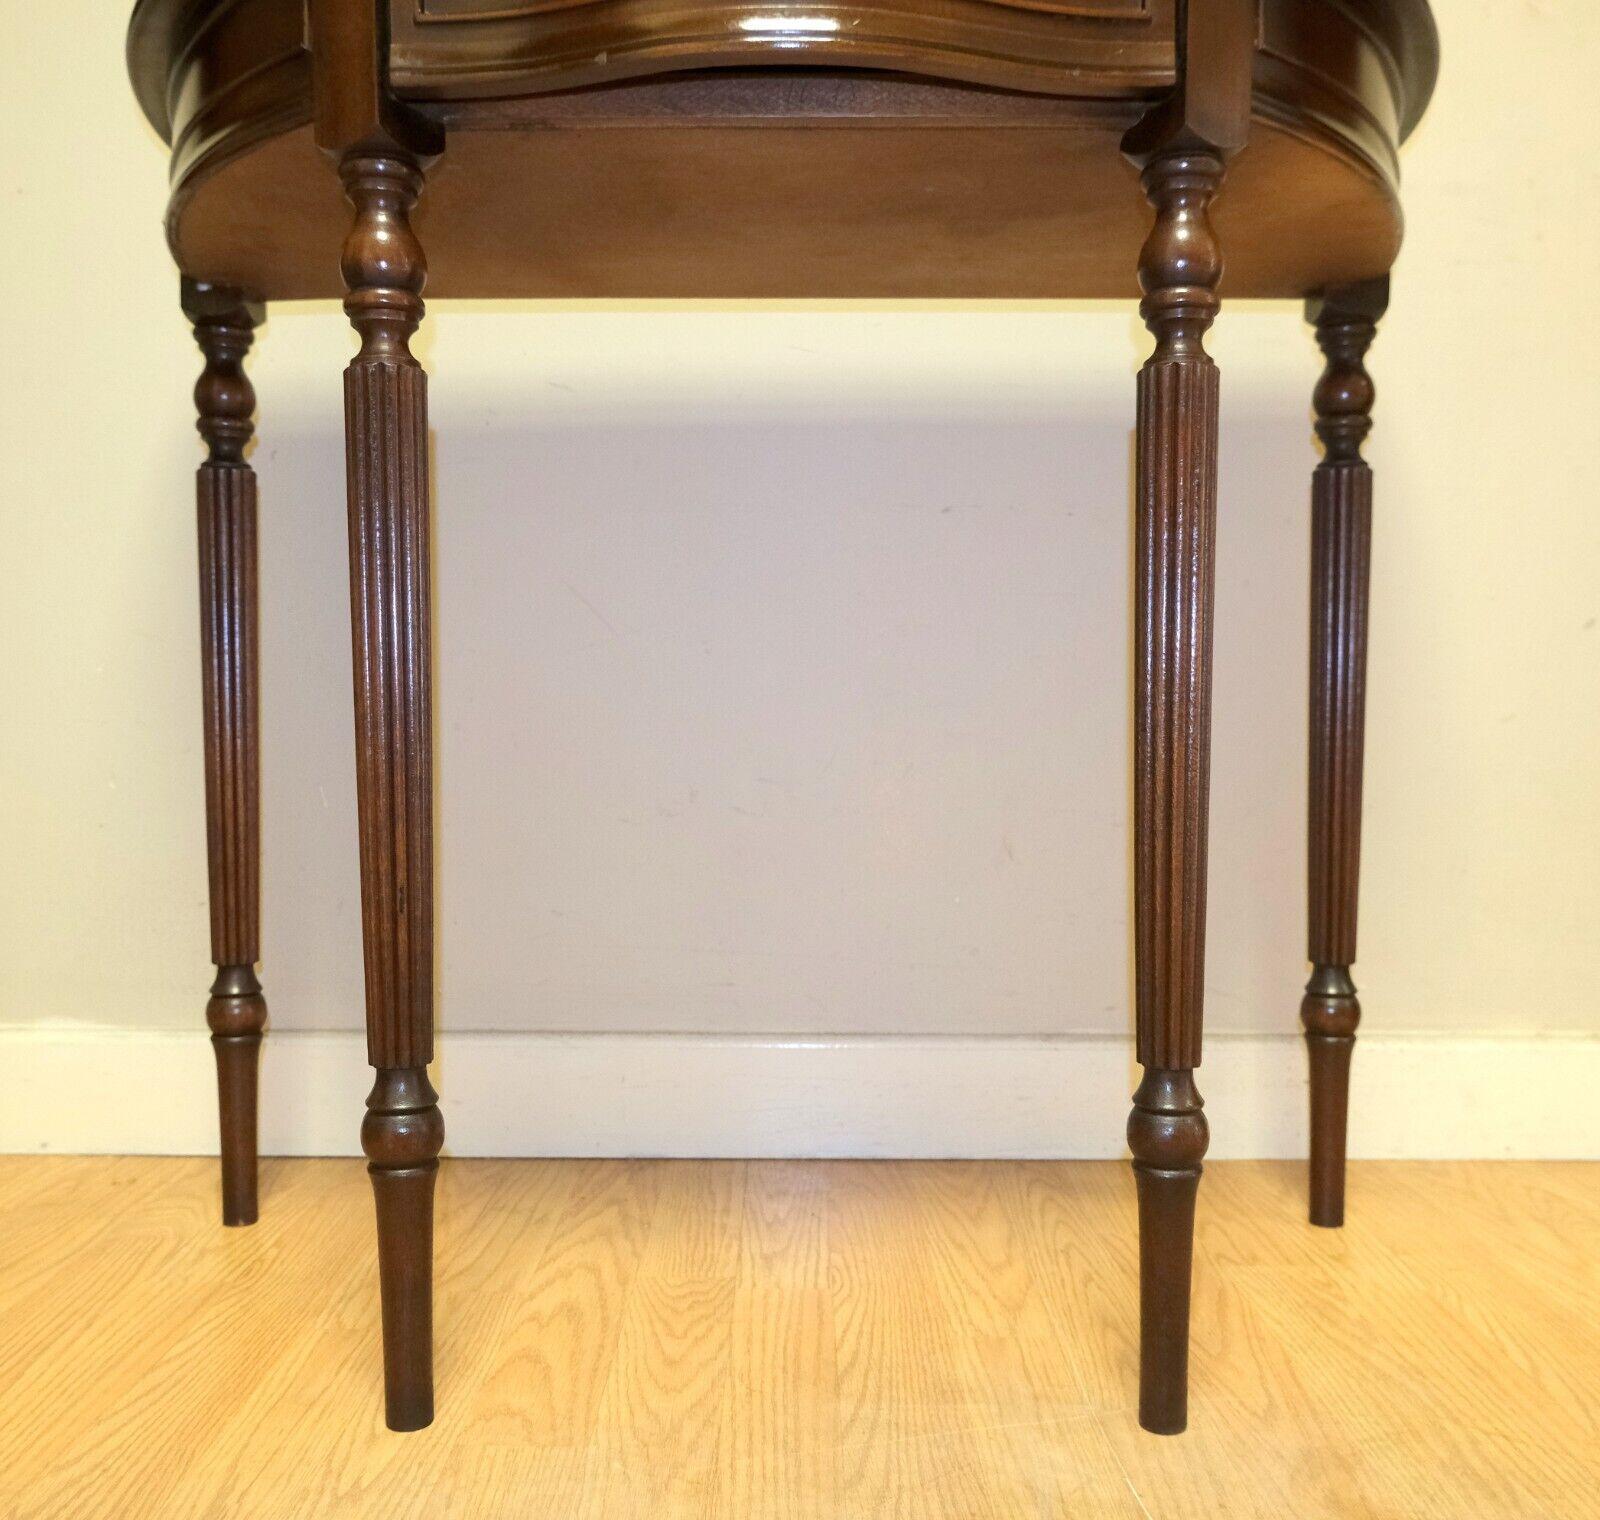 Hand-Crafted Charming Antique Brown Hardwood Demi Lune Console Table with Single Drawer